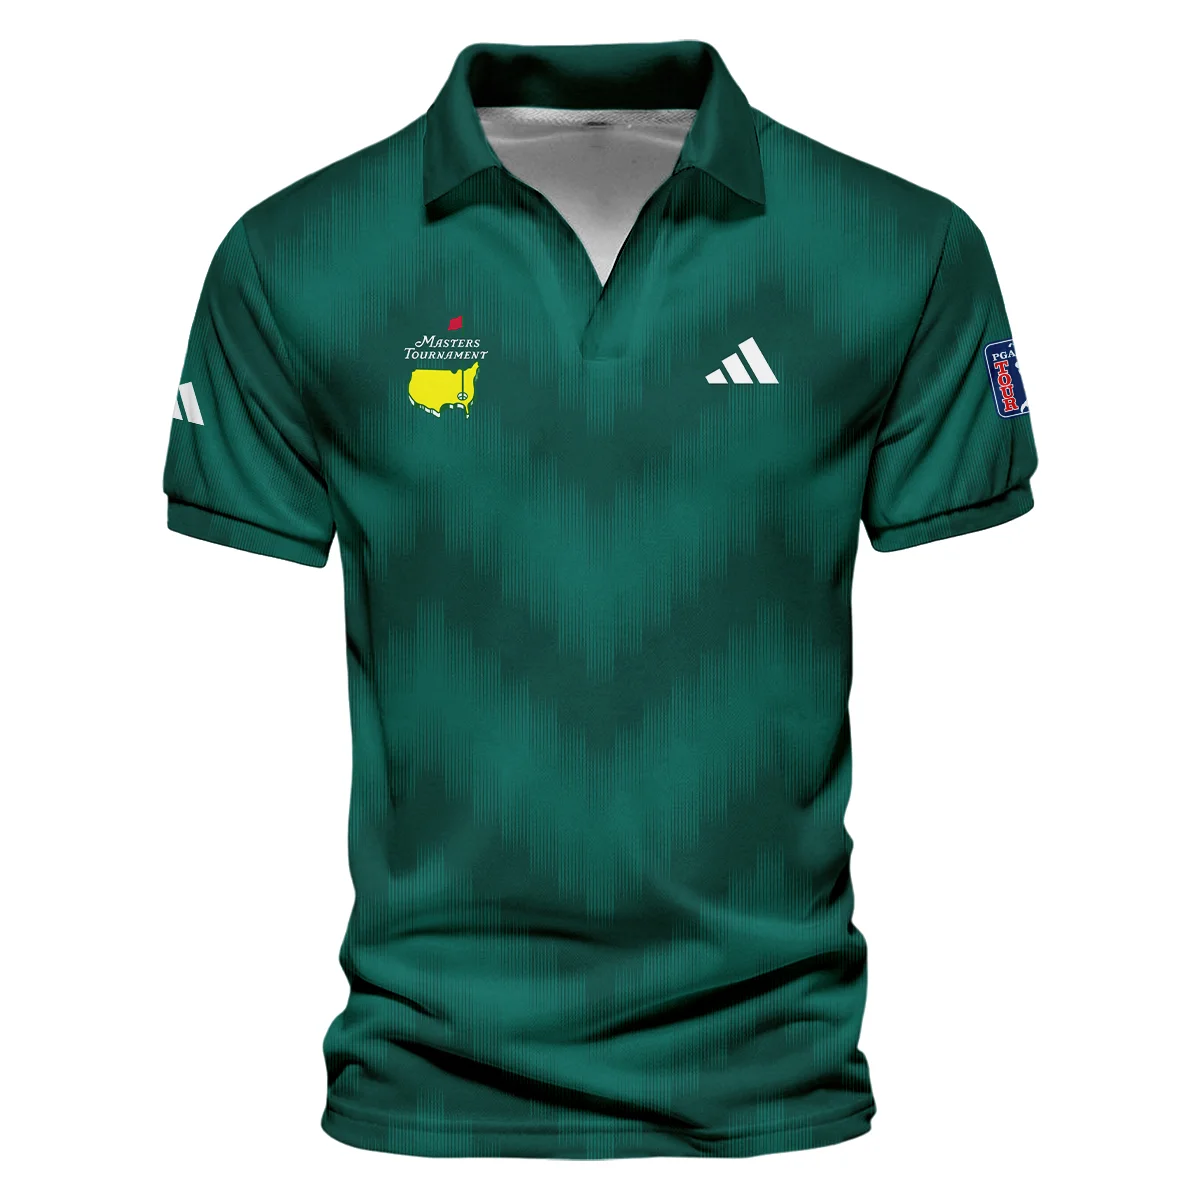 Golf Sport Green Gradient Stripes Pattern Adidas Masters Tournament Vneck Polo Shirt Style Classic Polo Shirt For Men